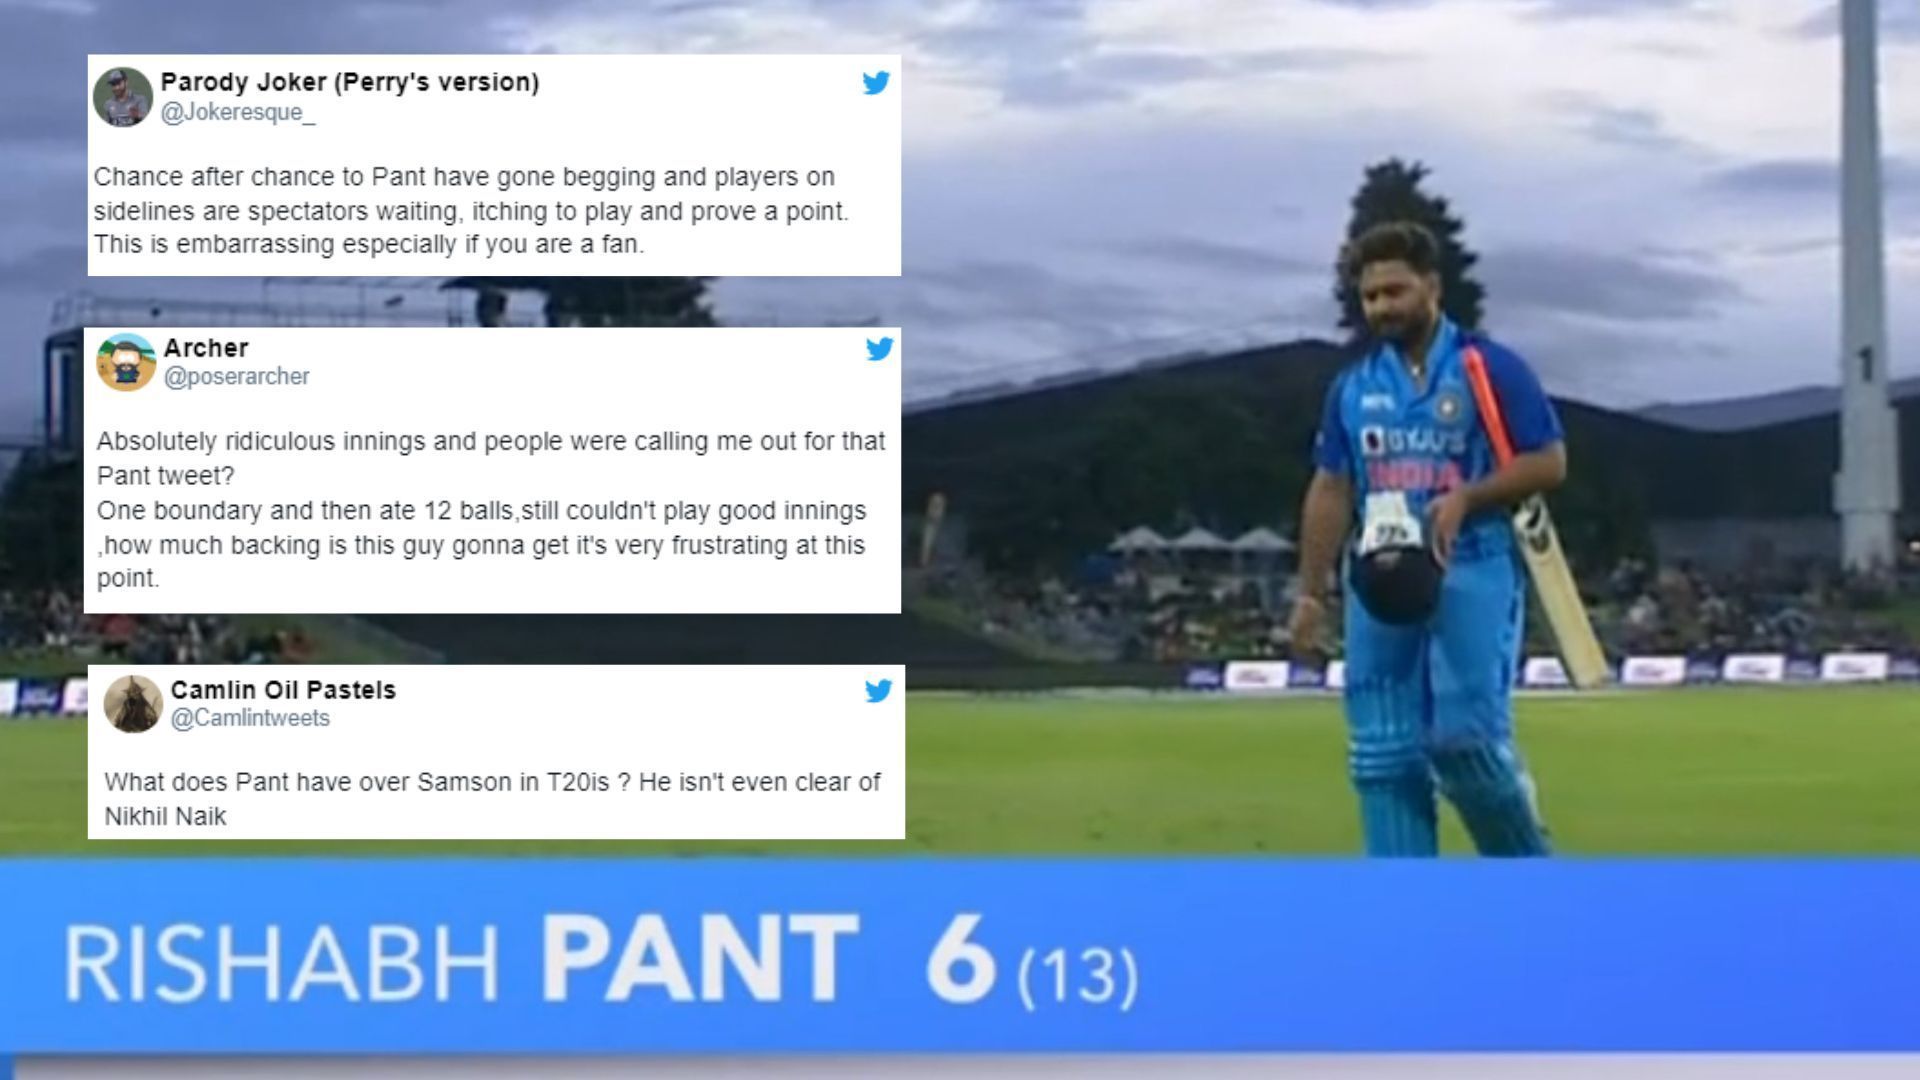 Rishabh Pant failed to convert yet another chance in T20Is. (P.C.:Prime Video)